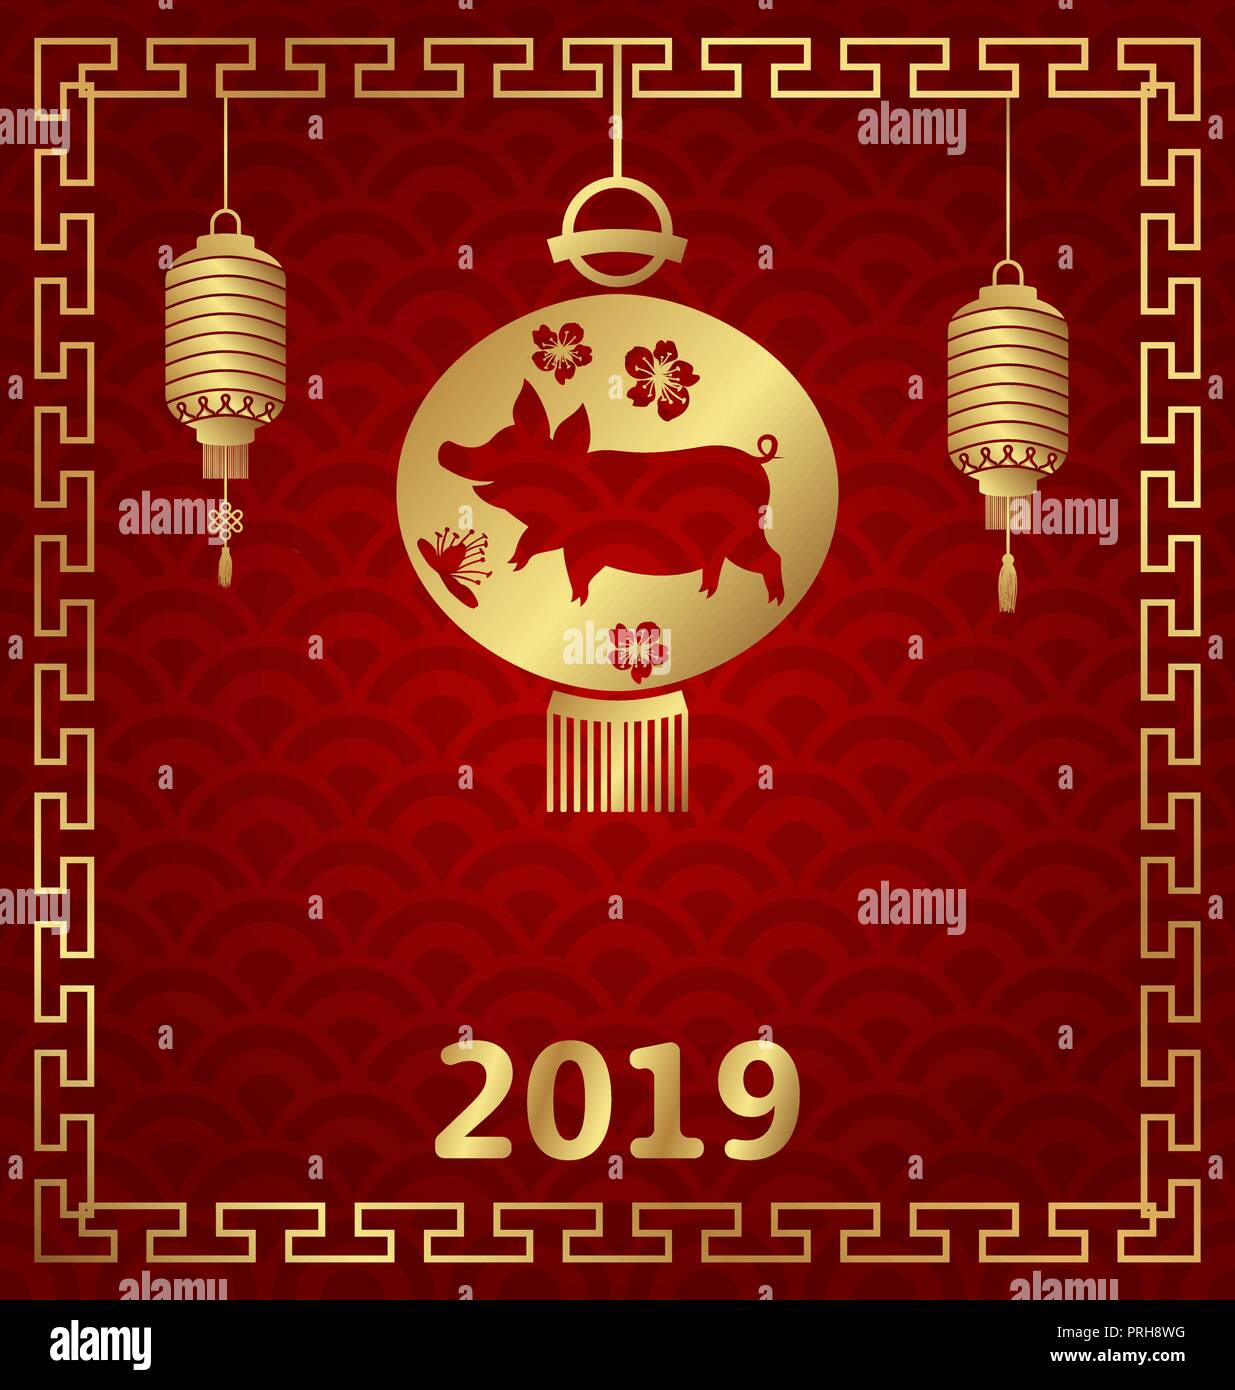 Chinese Background for Happy New Year 2019 Zodiac with Pig Sign Stock Vector Art ...1235 x 1390